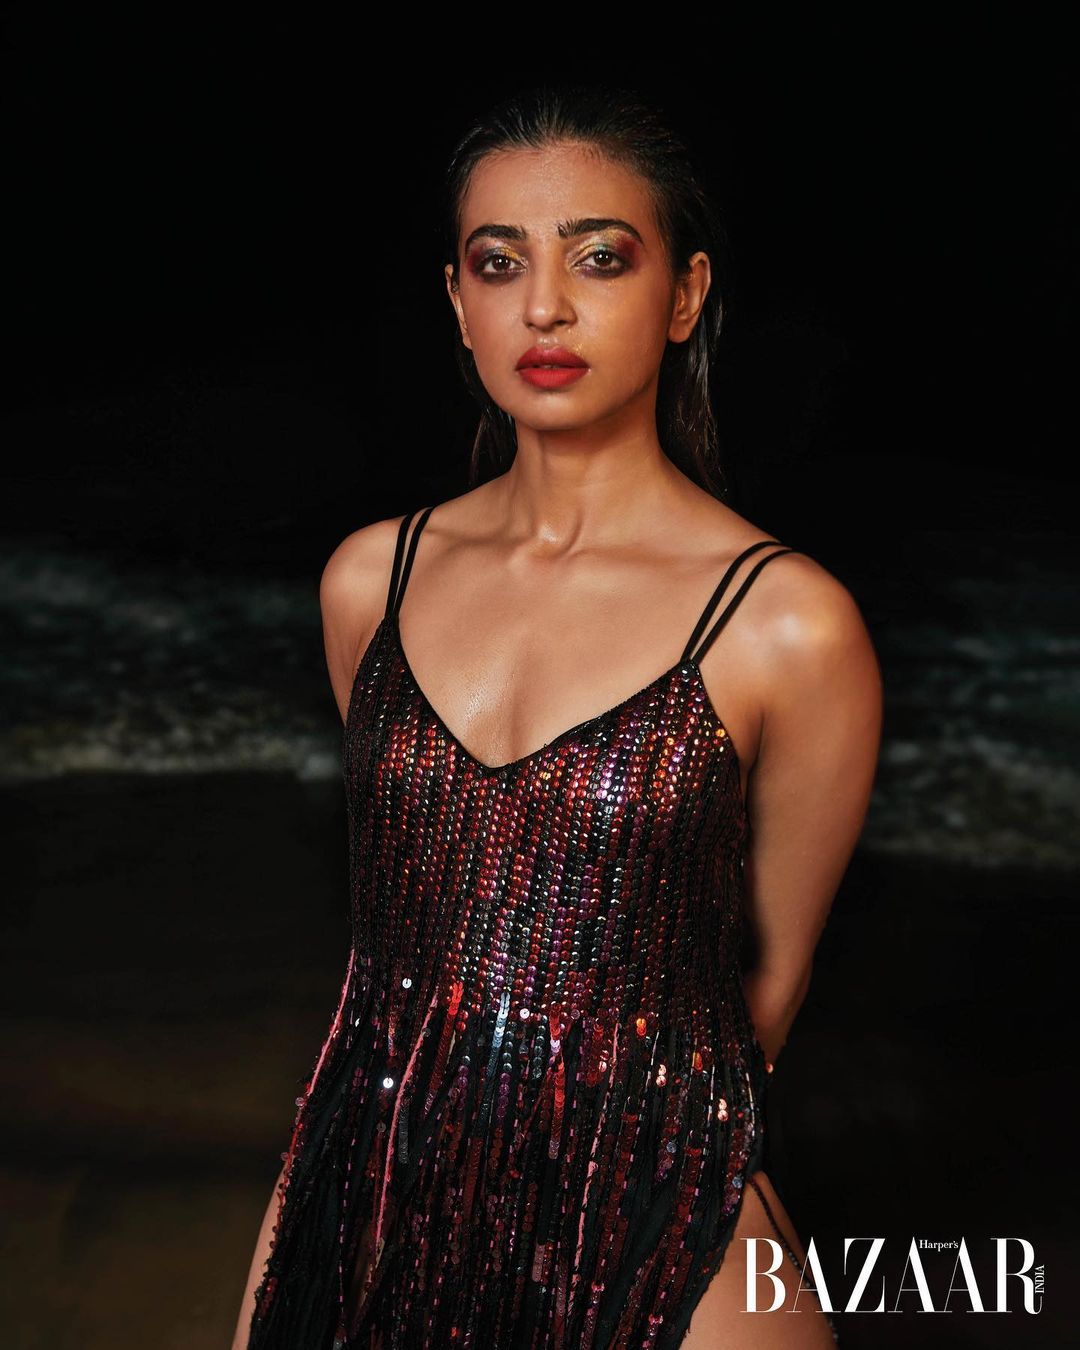 Radhika Apte looks sultry in the multicoloured sequin outfit